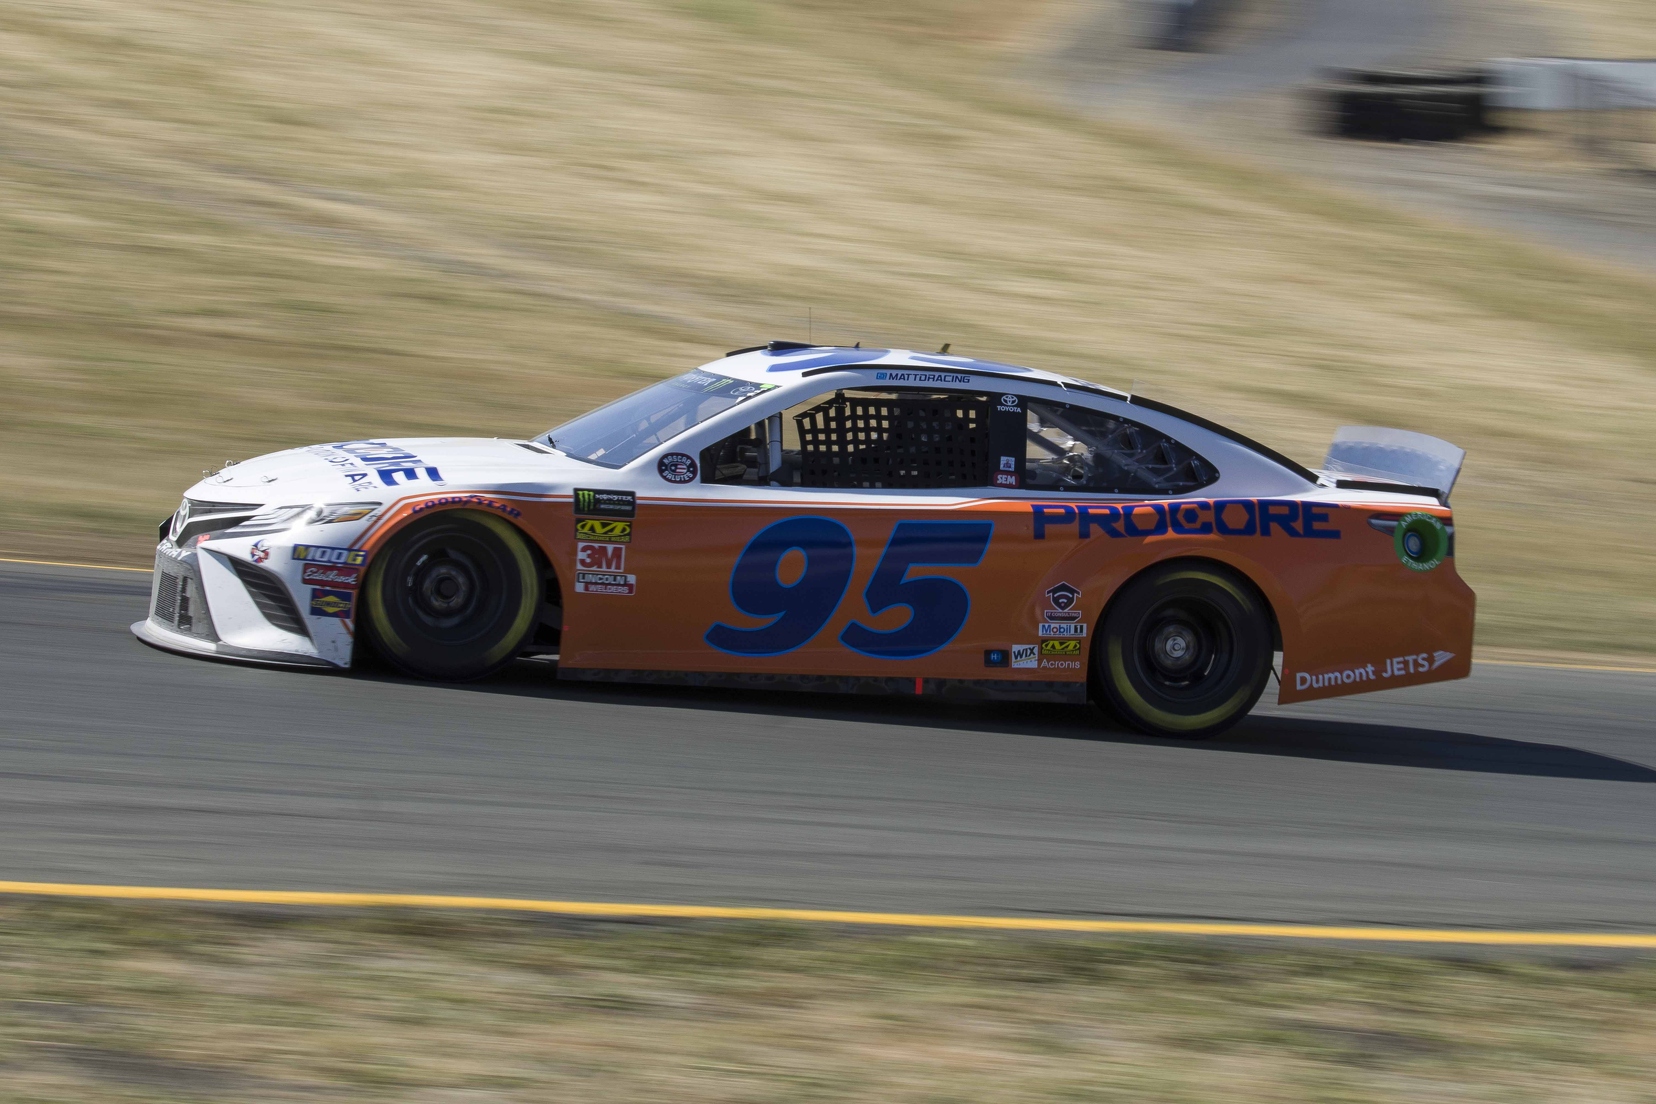 Matt DiBenedetto wheeled his No. 95 Procore Toyota for Levine Family Racing during one of Friday's practice sessions at the technical road course. Photo courtesy of Patrick Sue-Chan for Speedway Media.